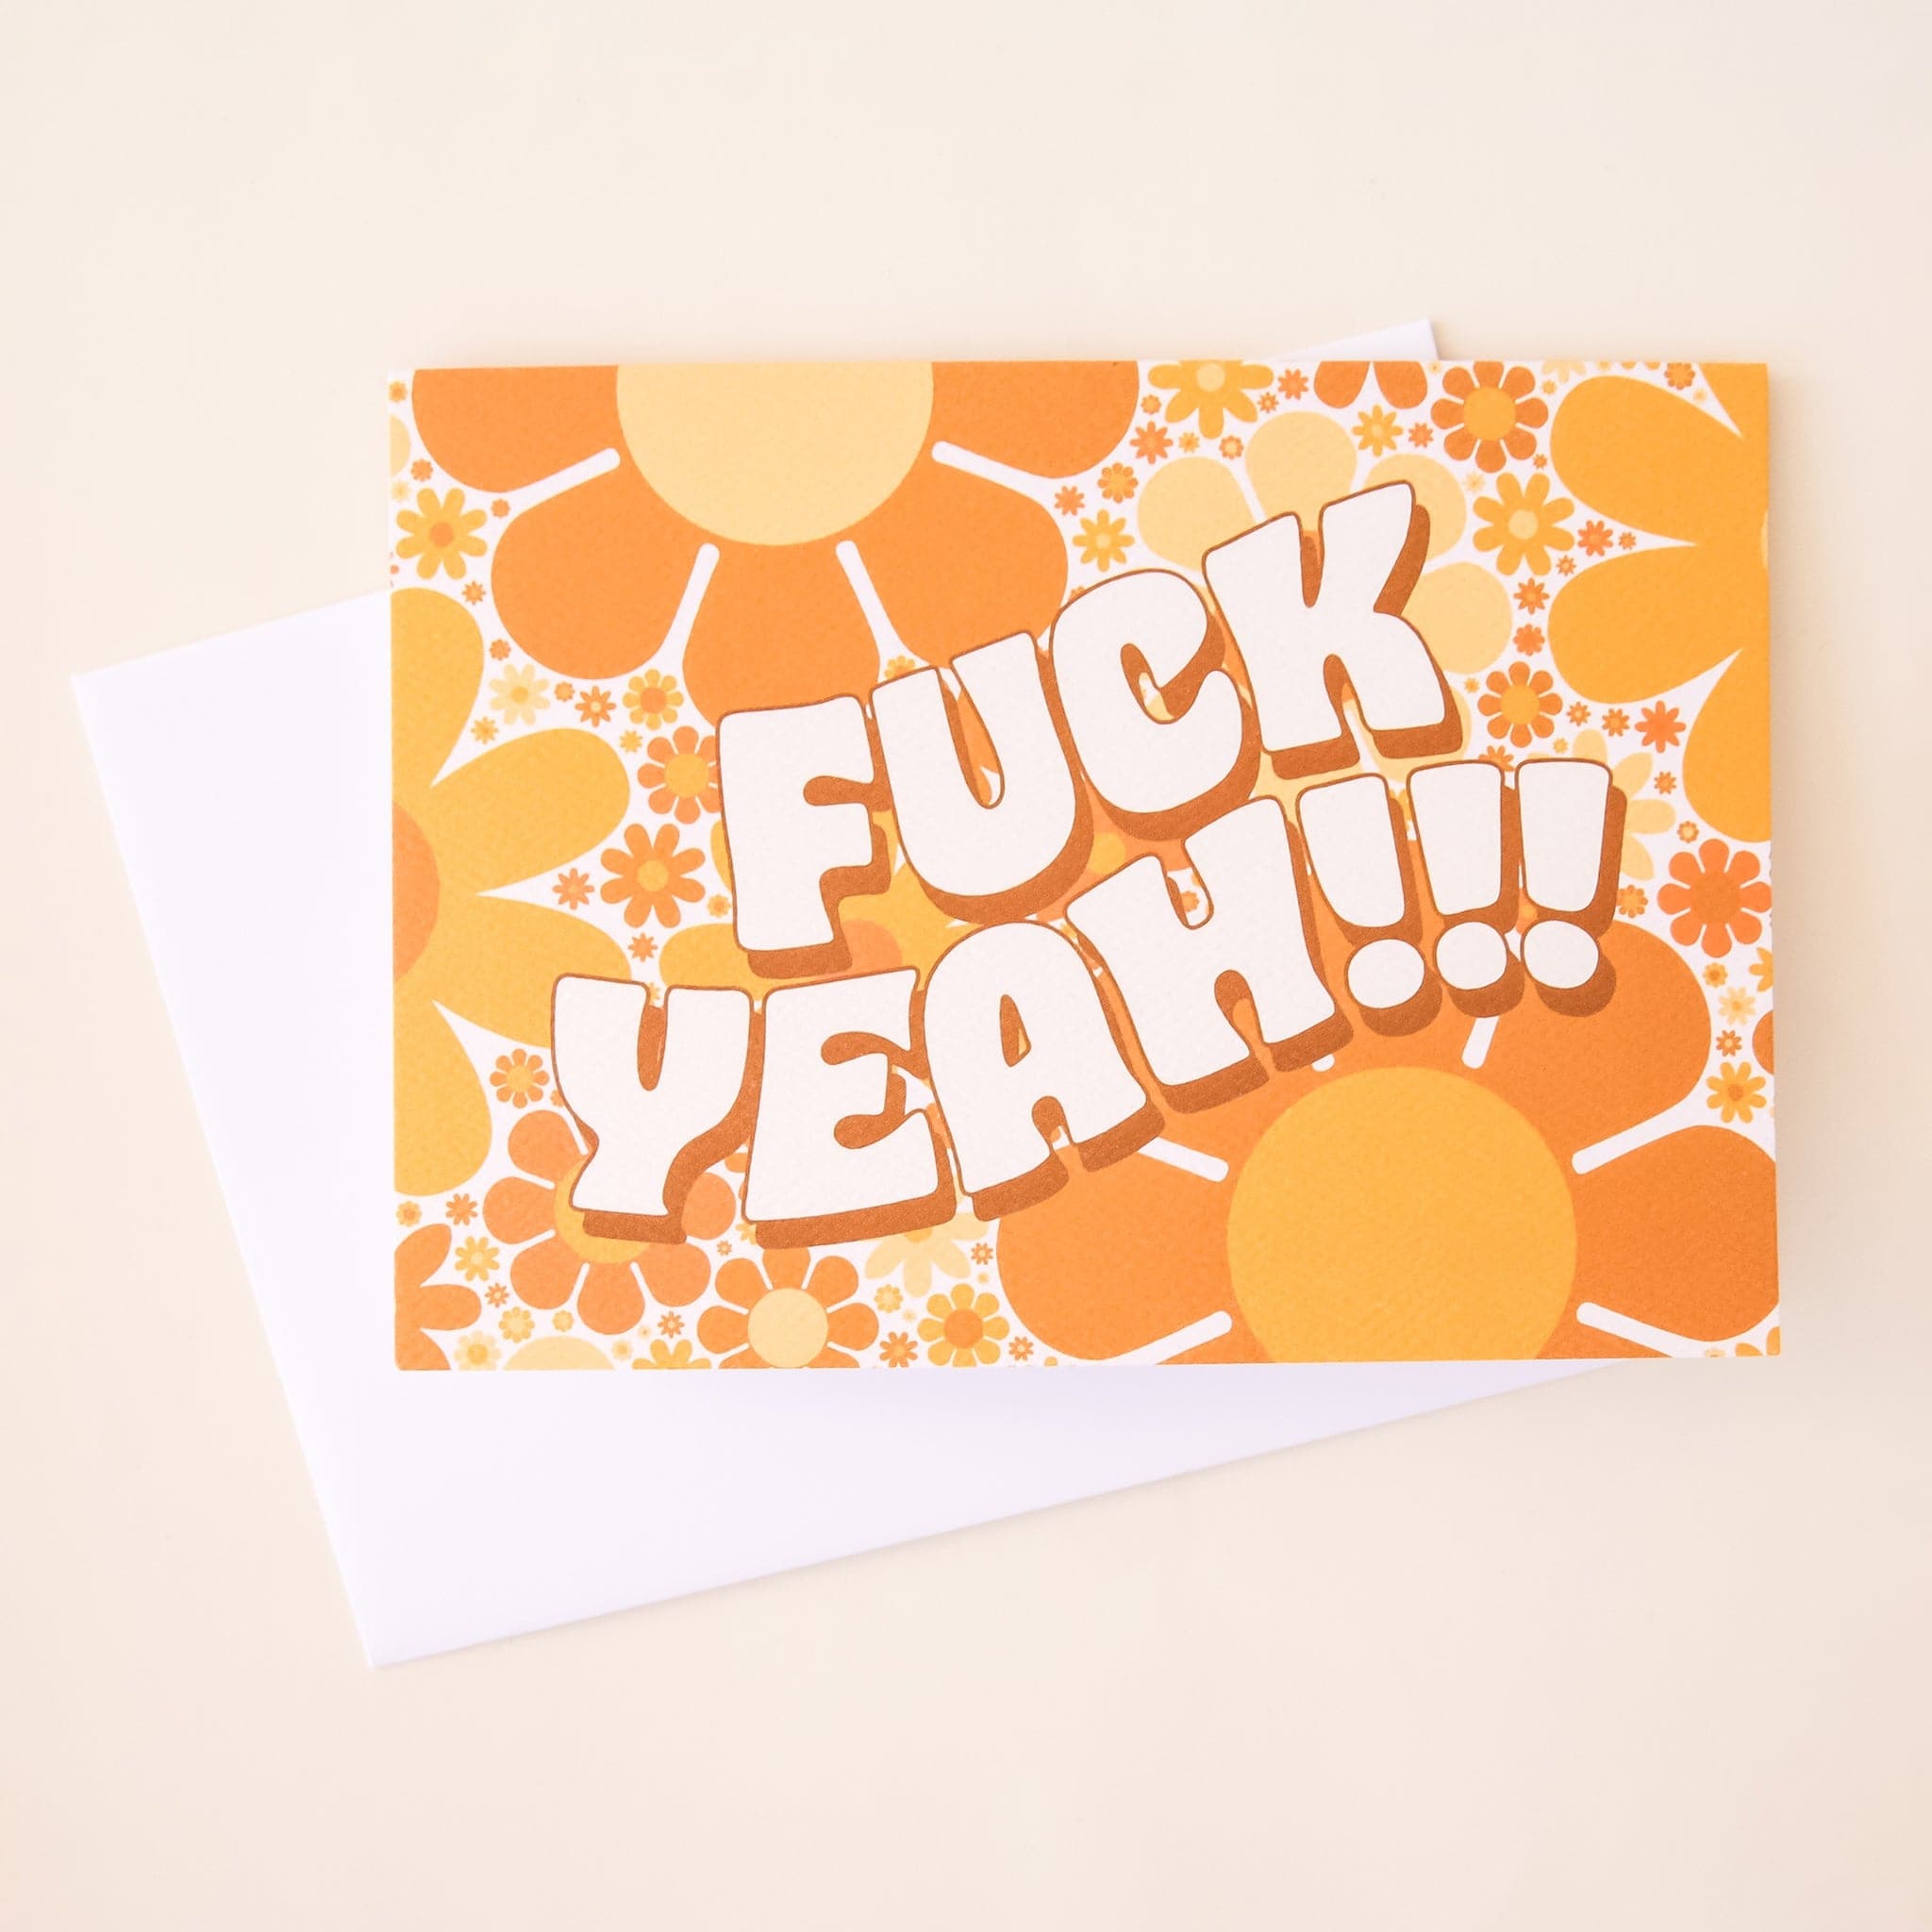 Greeting card filled with retro yellow and orange flowers. The card reads 'fuck yeah!!!' in curved white bubble lettering. The card is accompanied by a solid white envelope.